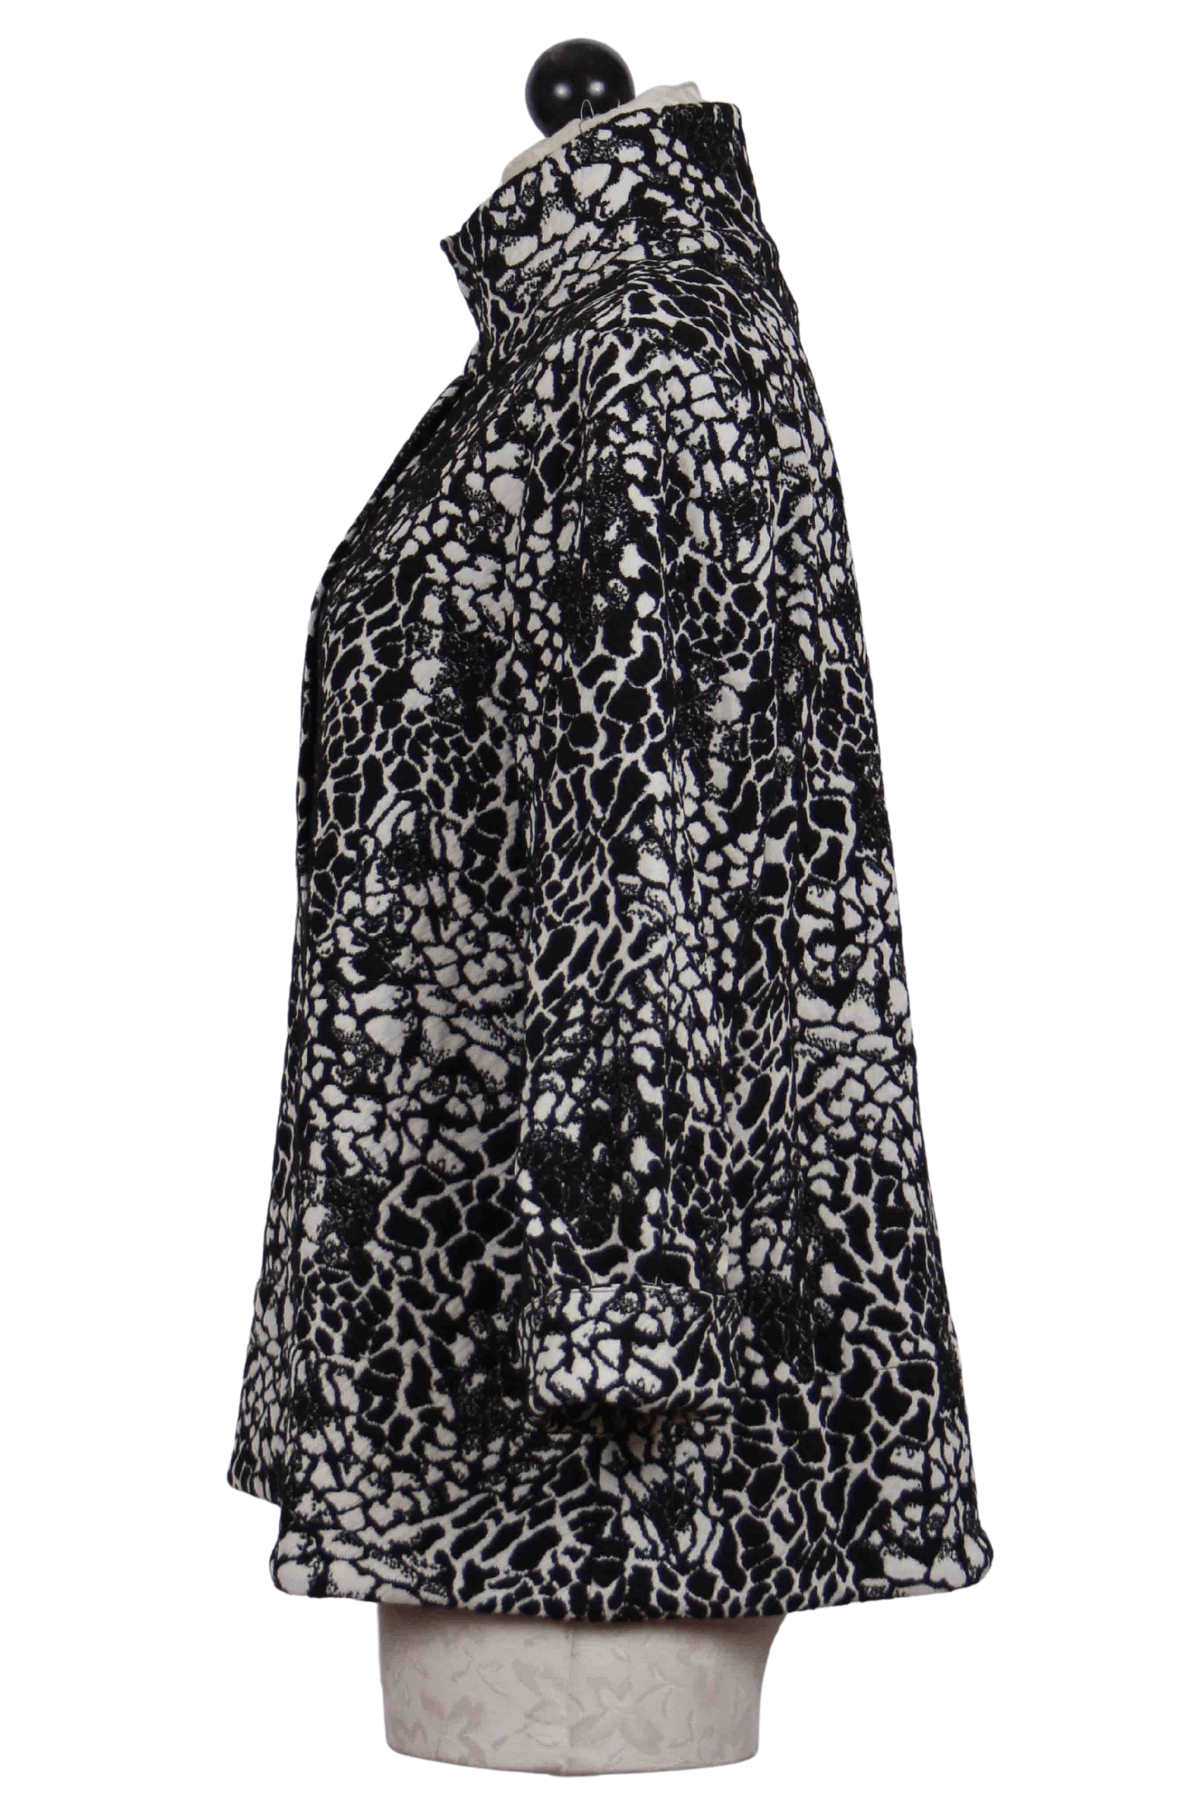 side view of Black and White Flora and Fauna Retro Jacket by Liv by Habitat